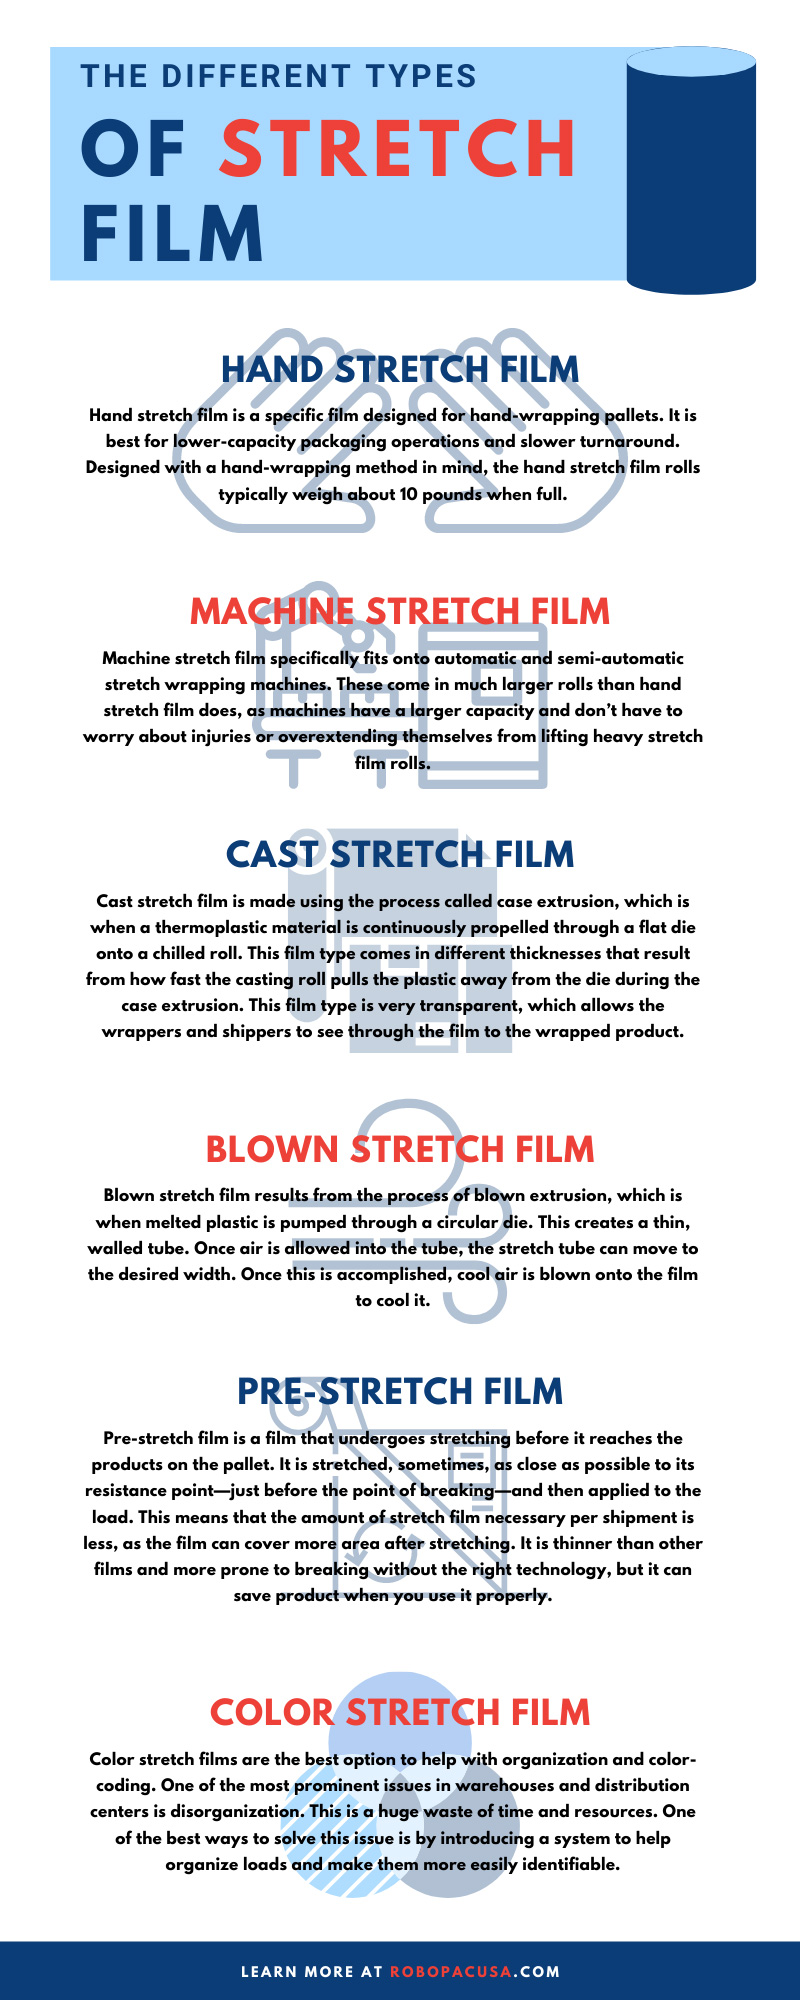 The Different Types of Stretch Film